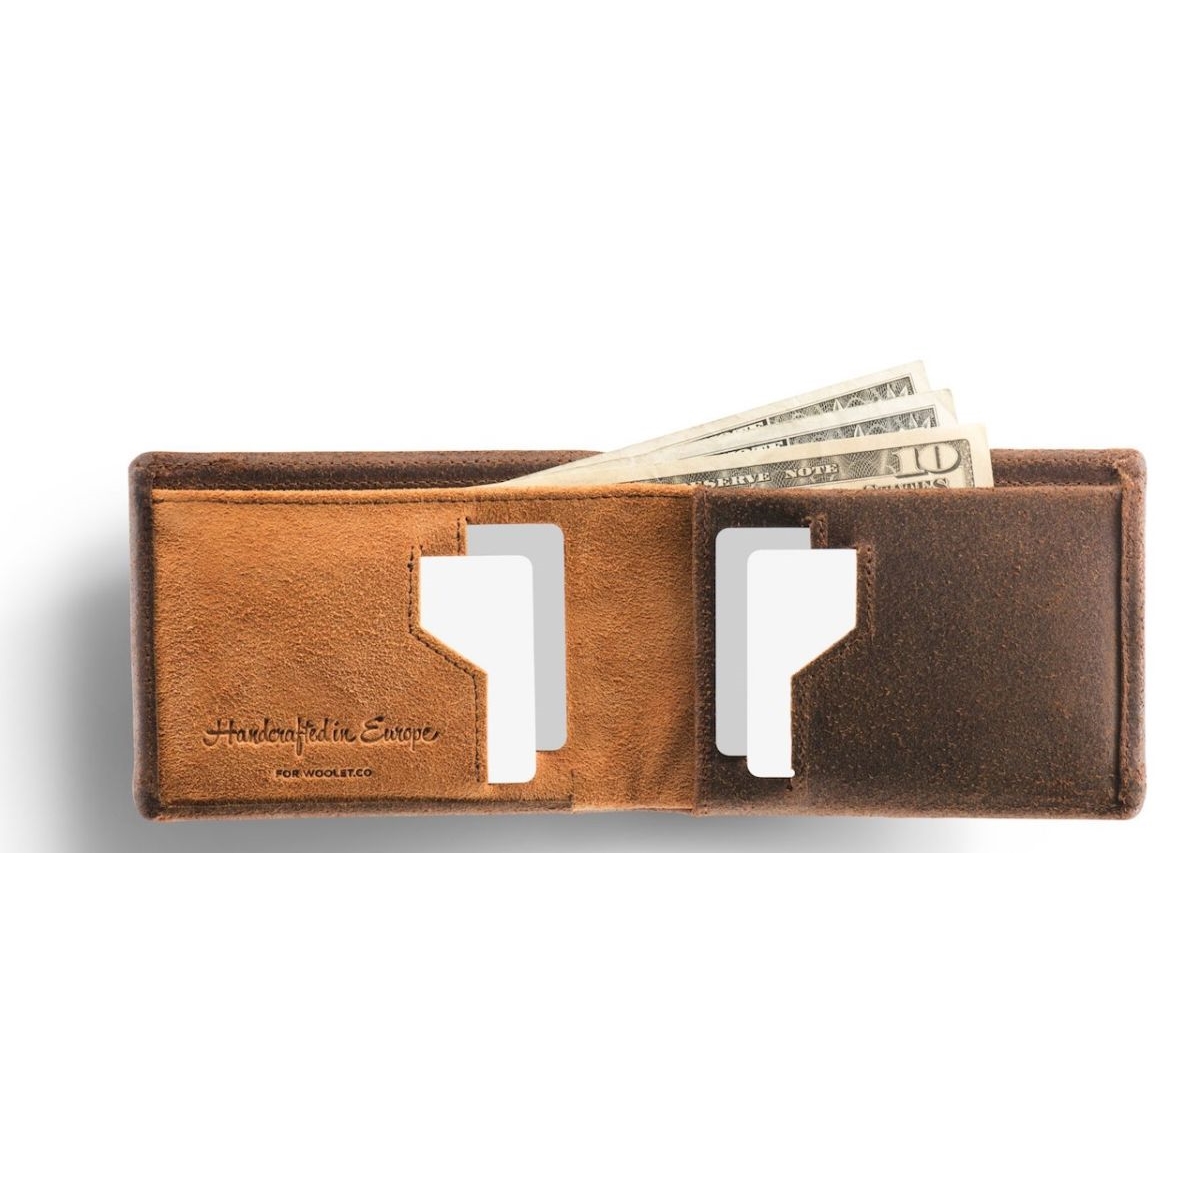 Wallets $91 And Up , Wallets Prices , Best Price Wallets - Wallets 